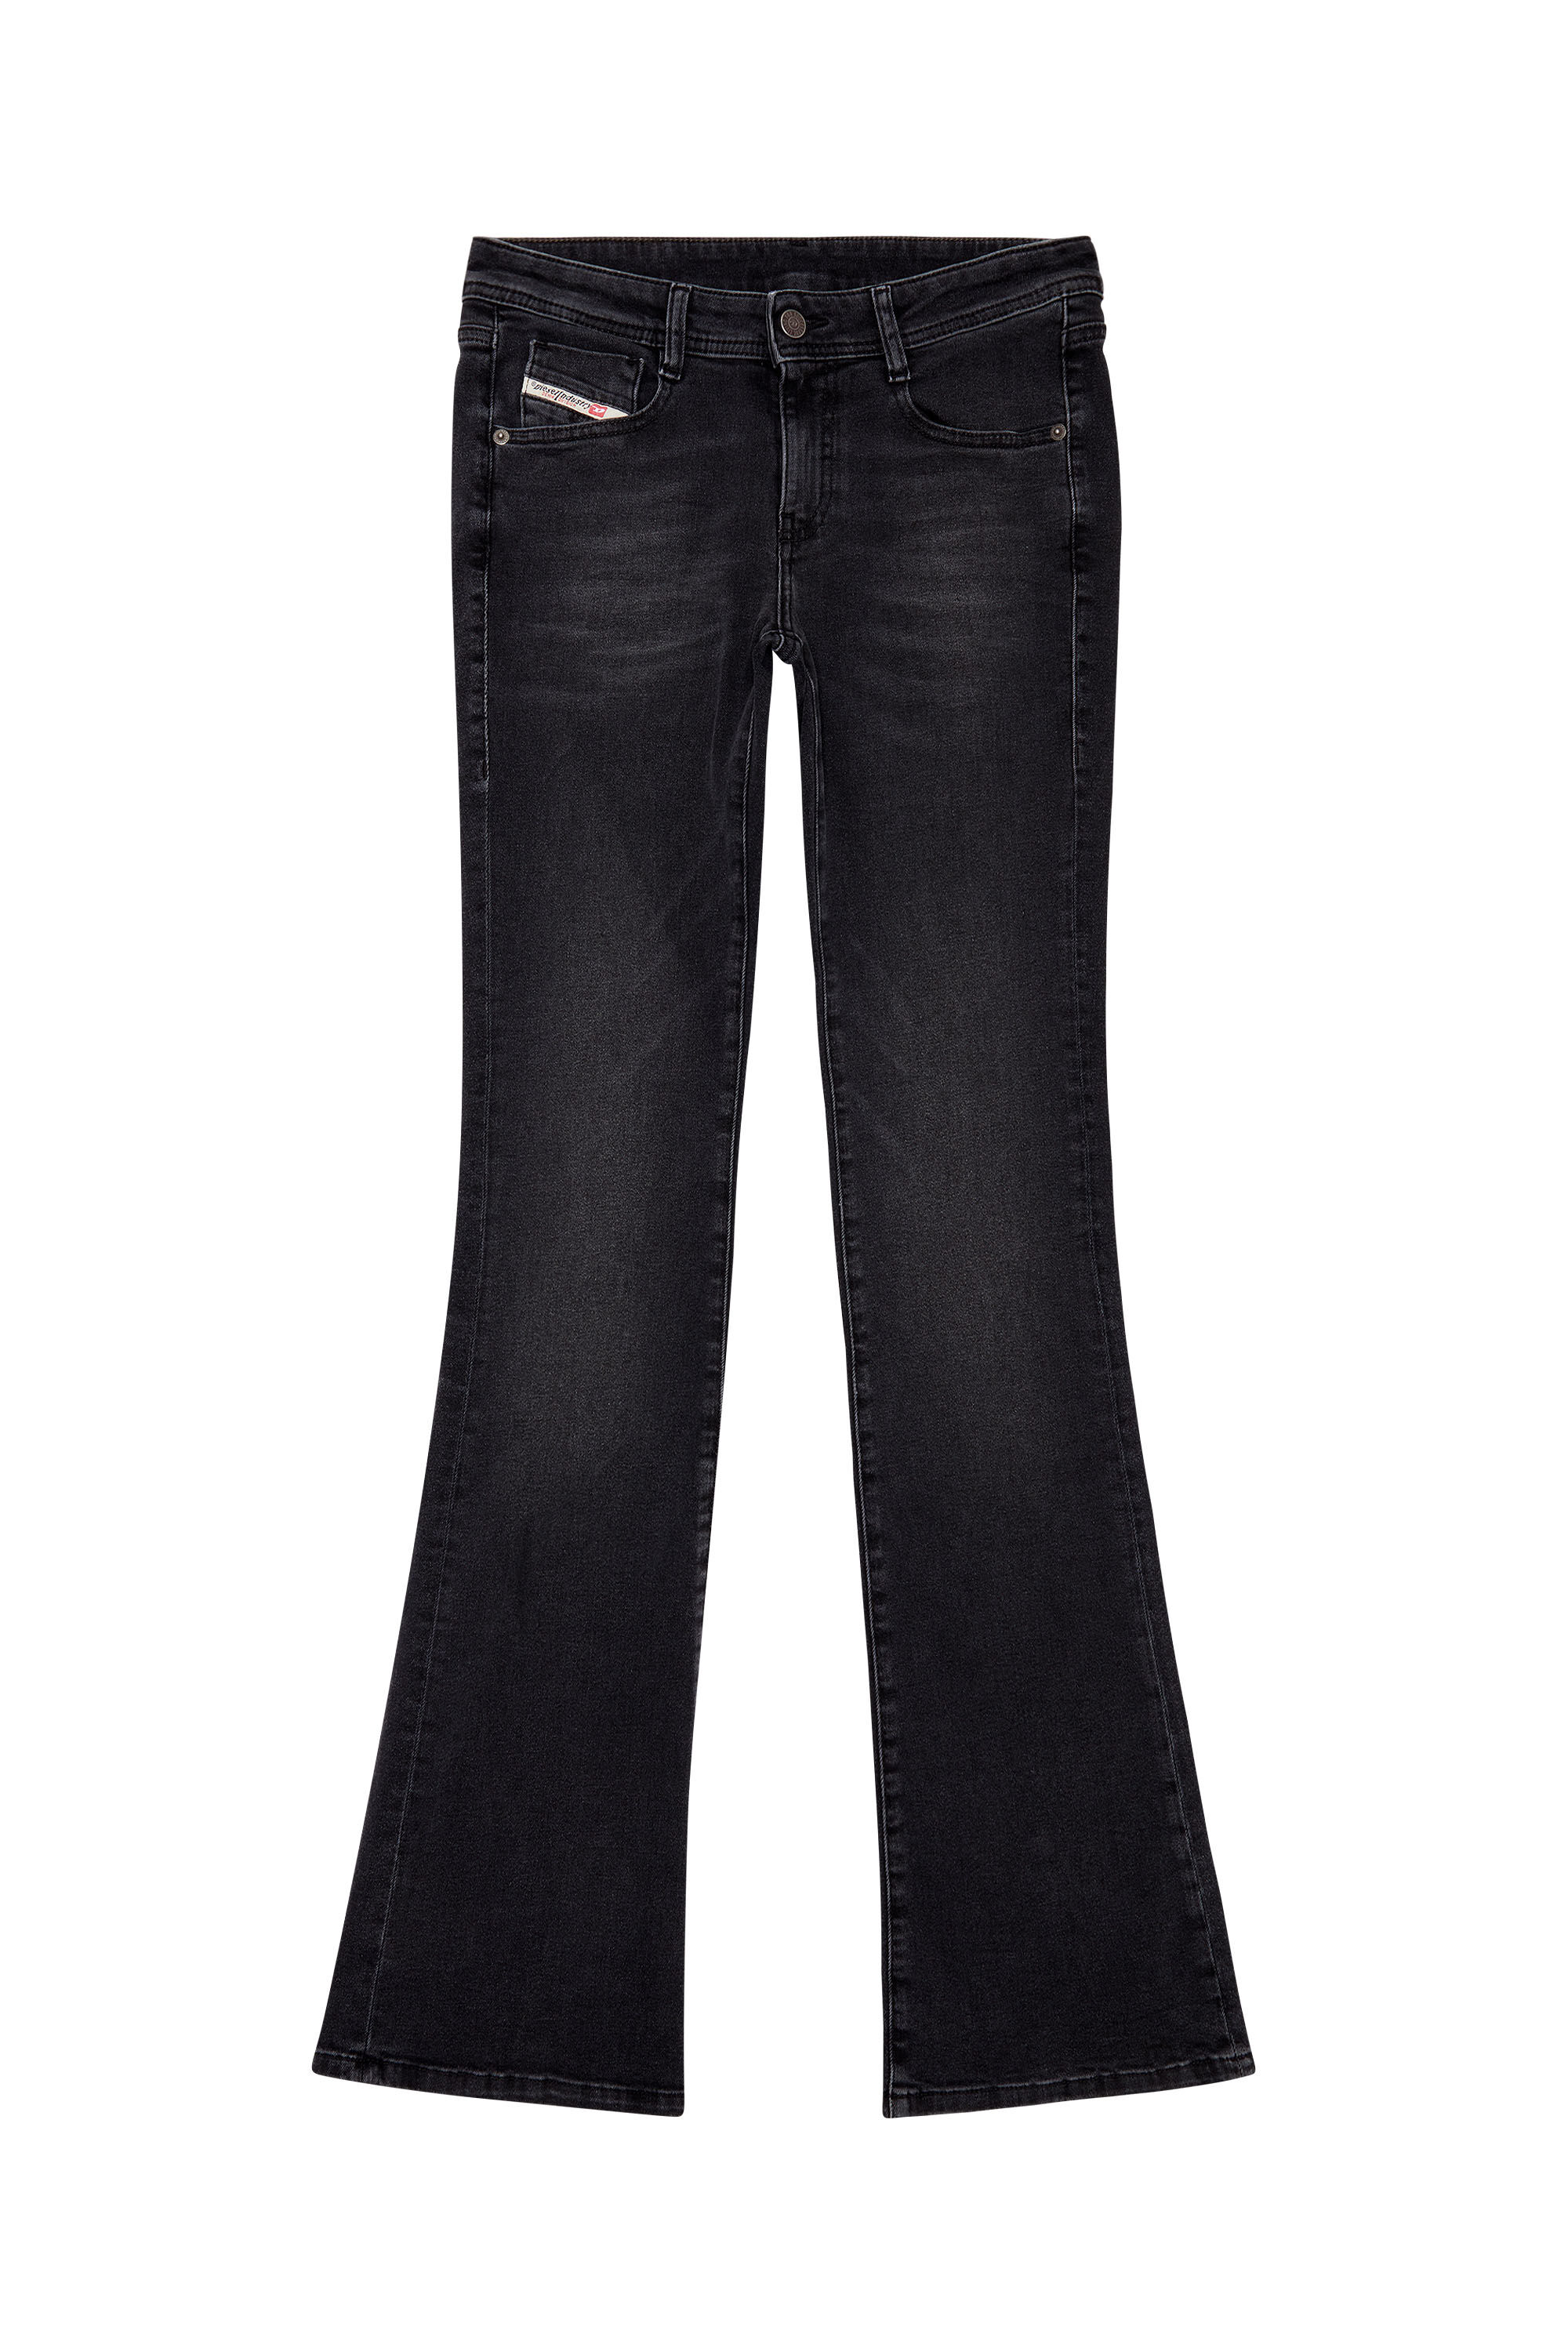 Women's Bootcut and Flare Jeans, Dark grey